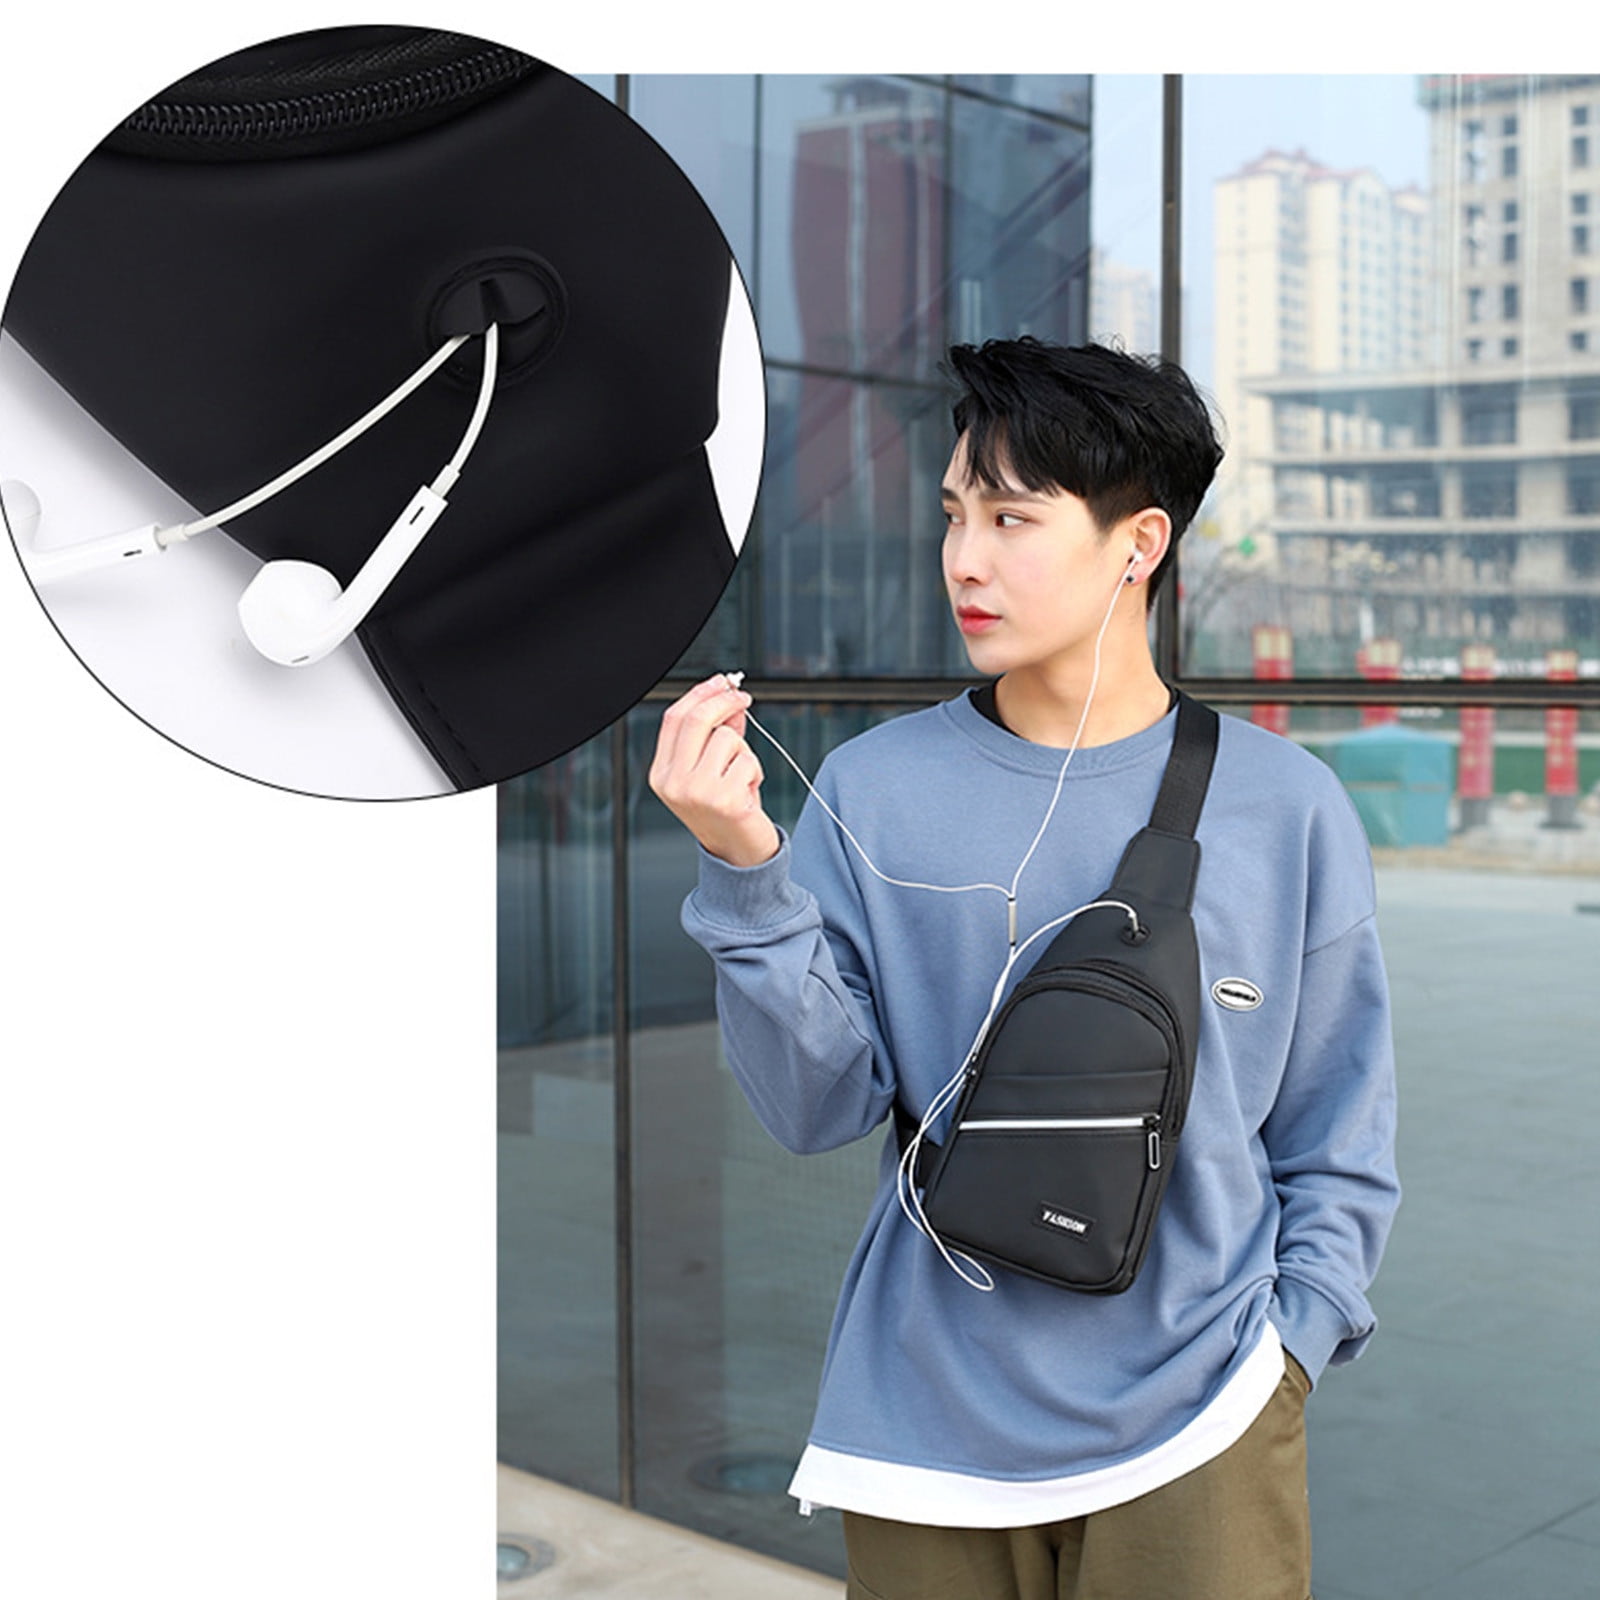 EJWQWQE Small Sling Bag Crossbody Chest Shoulder Water Resistant Sling Purse  One Strap Travel Bag For Men Women Boys With Earphone Hole 